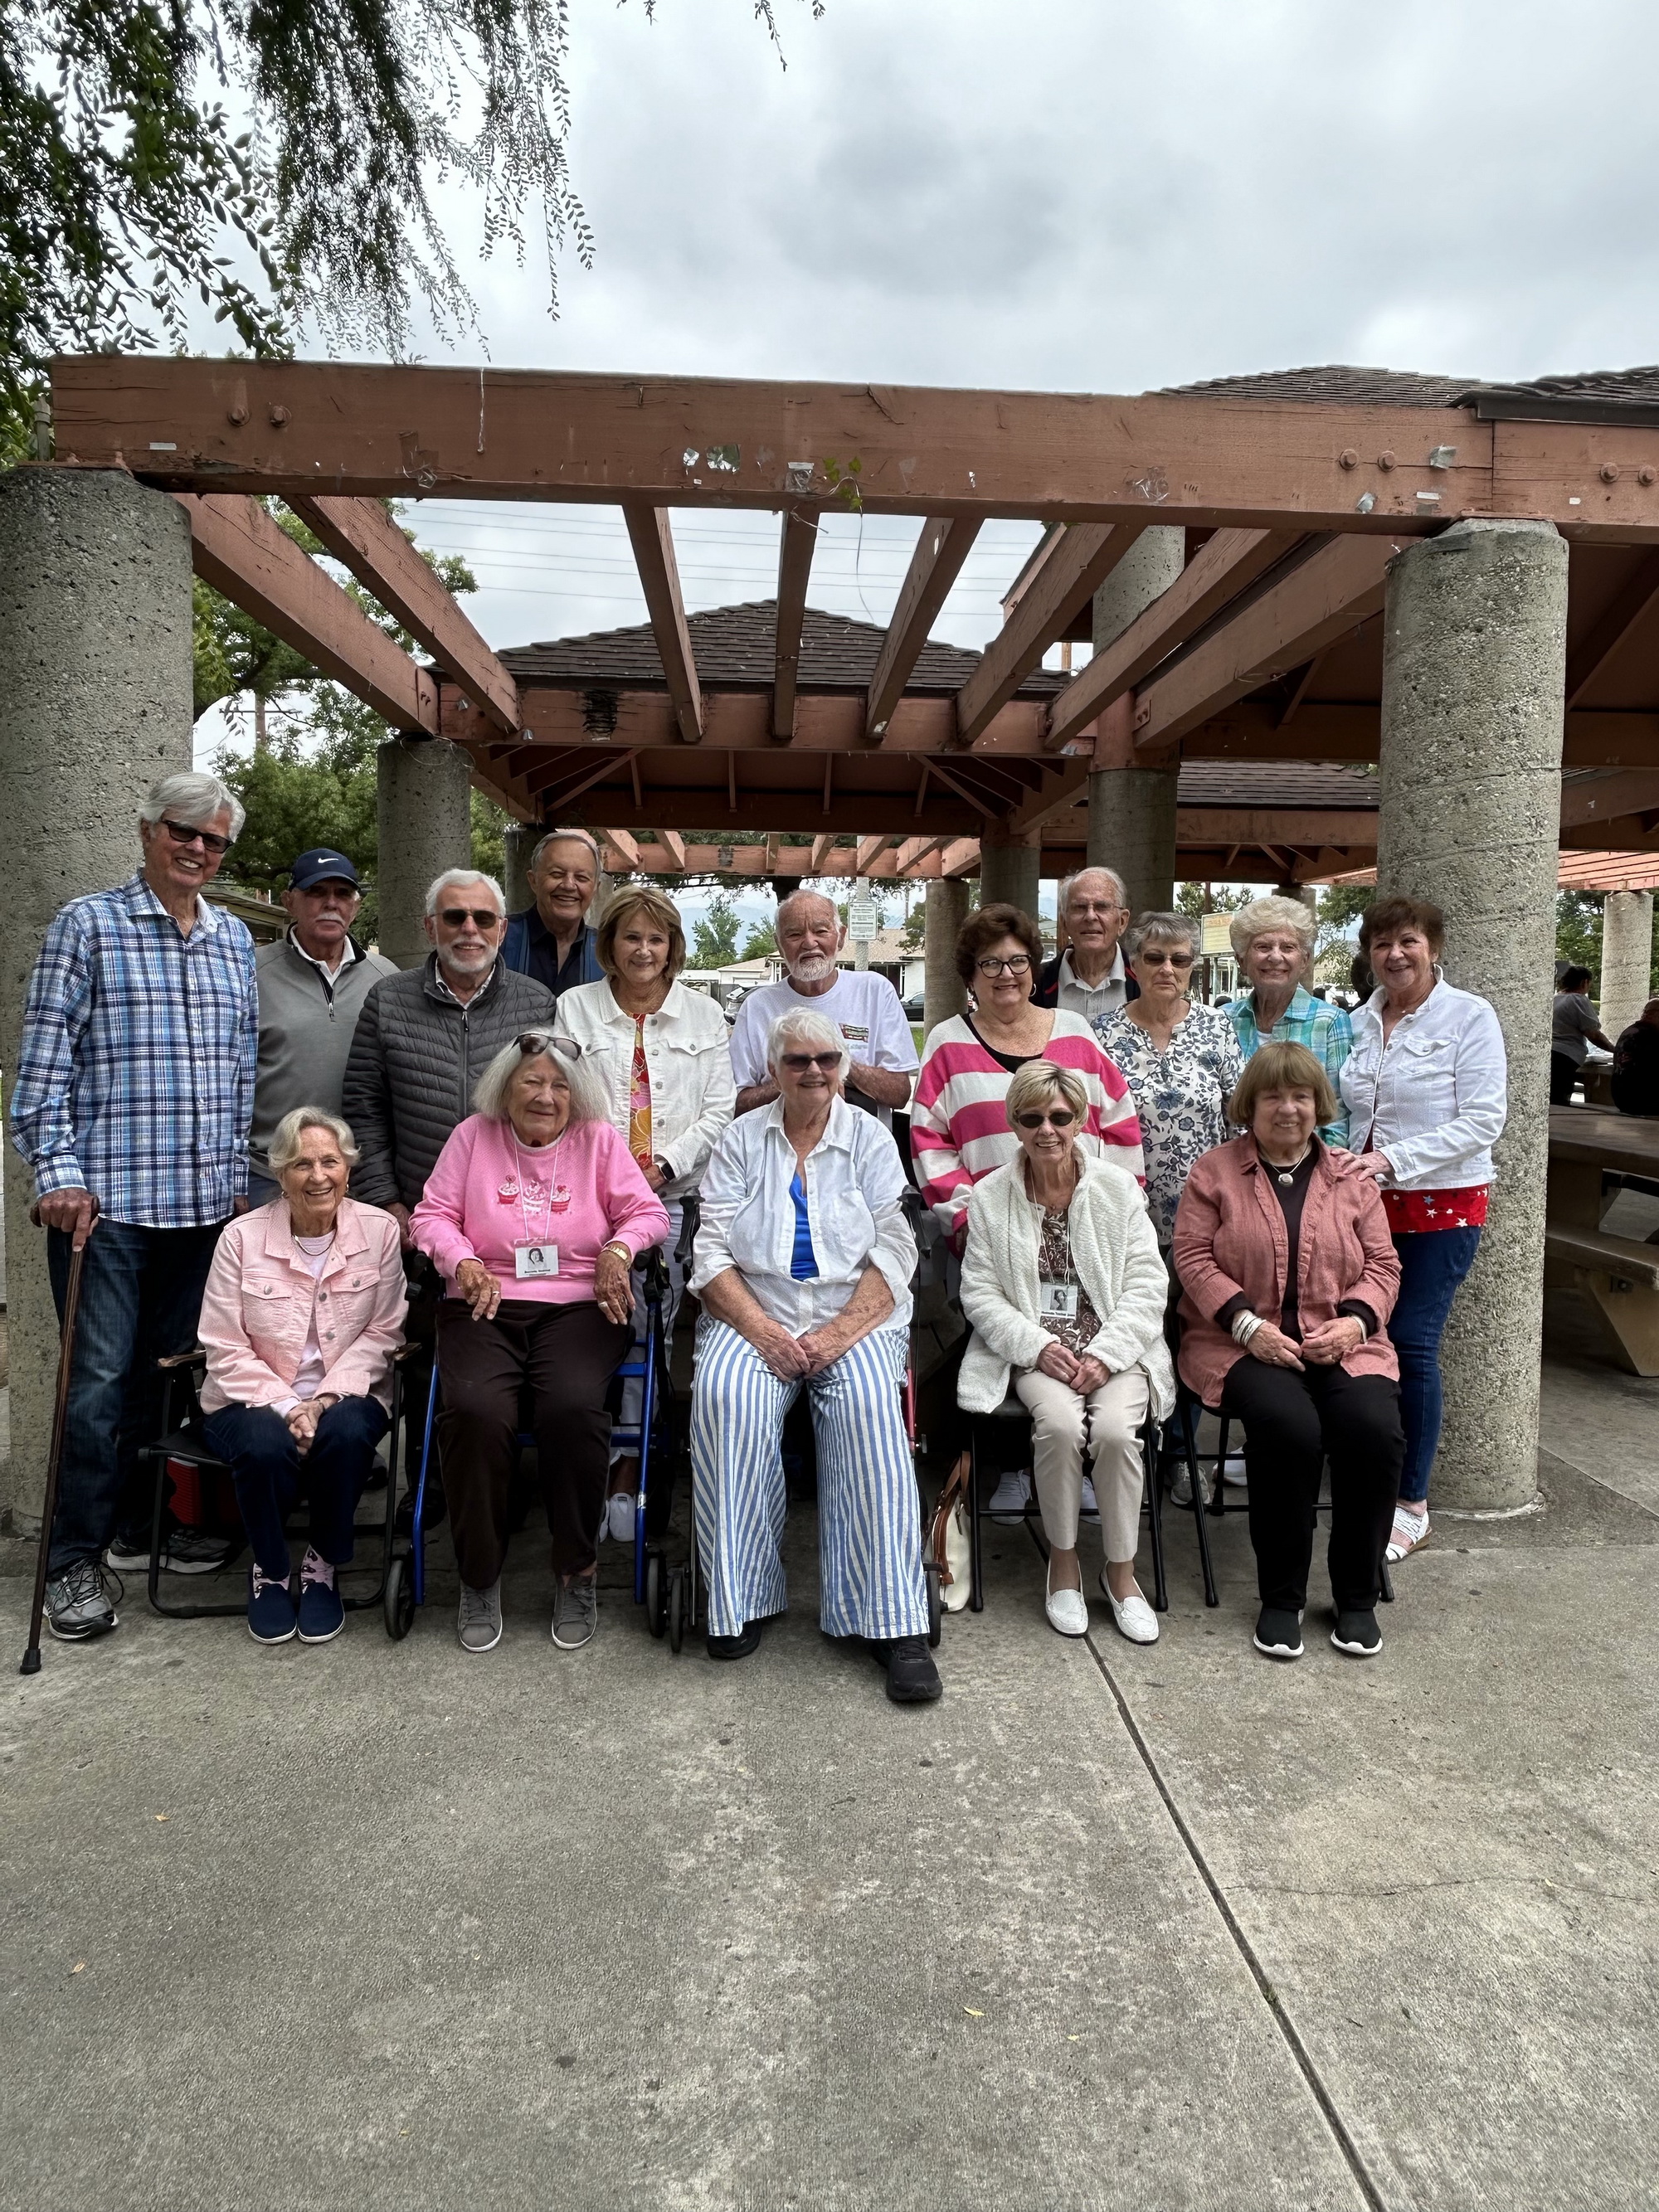 23-06-18-Class of 56 Reunion at CHS_No_15_resize